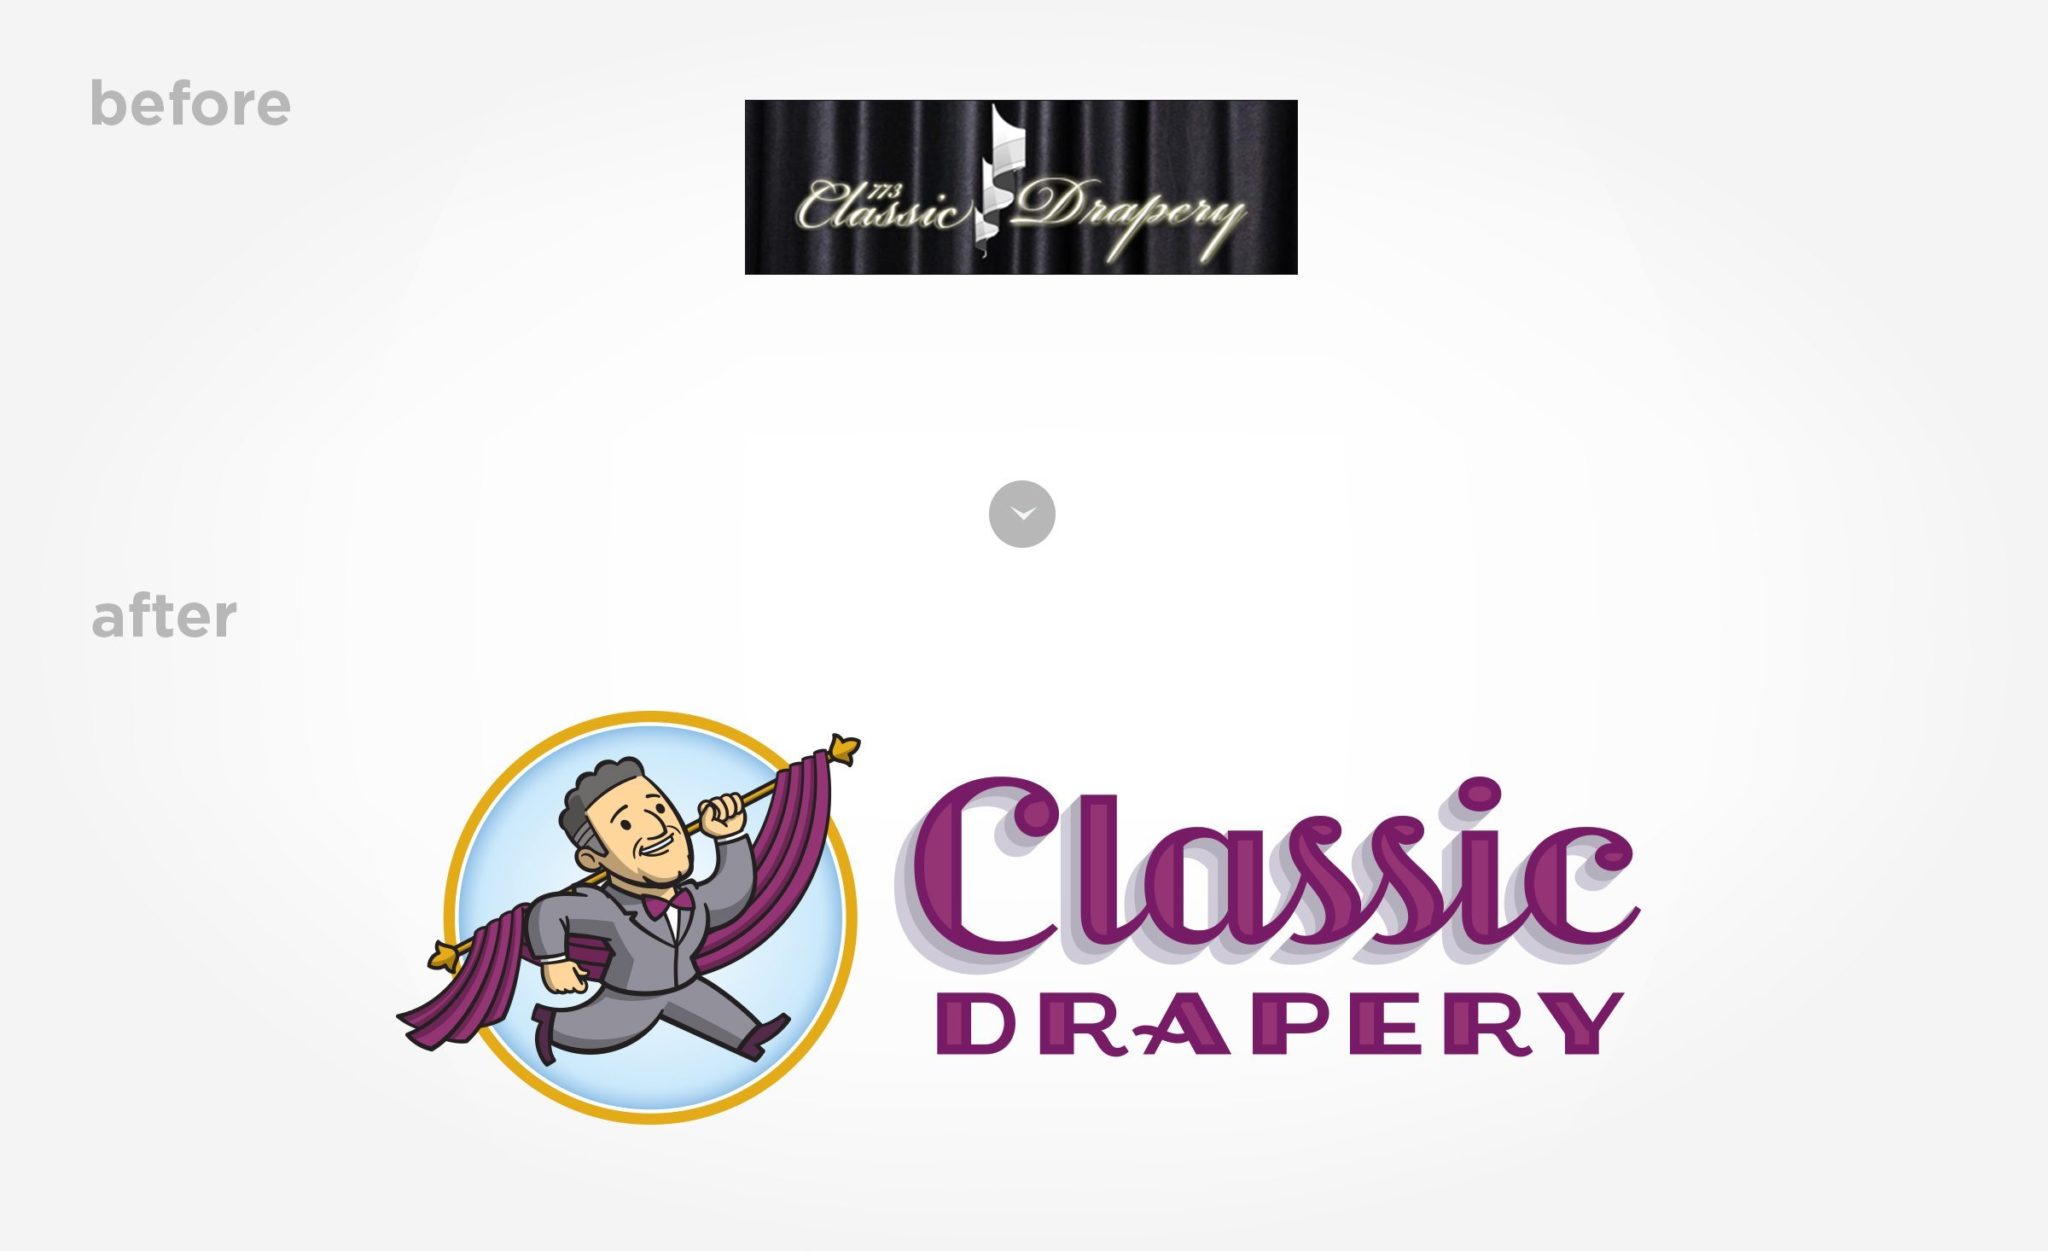 Before & after logo re-design for Classic Drapery.